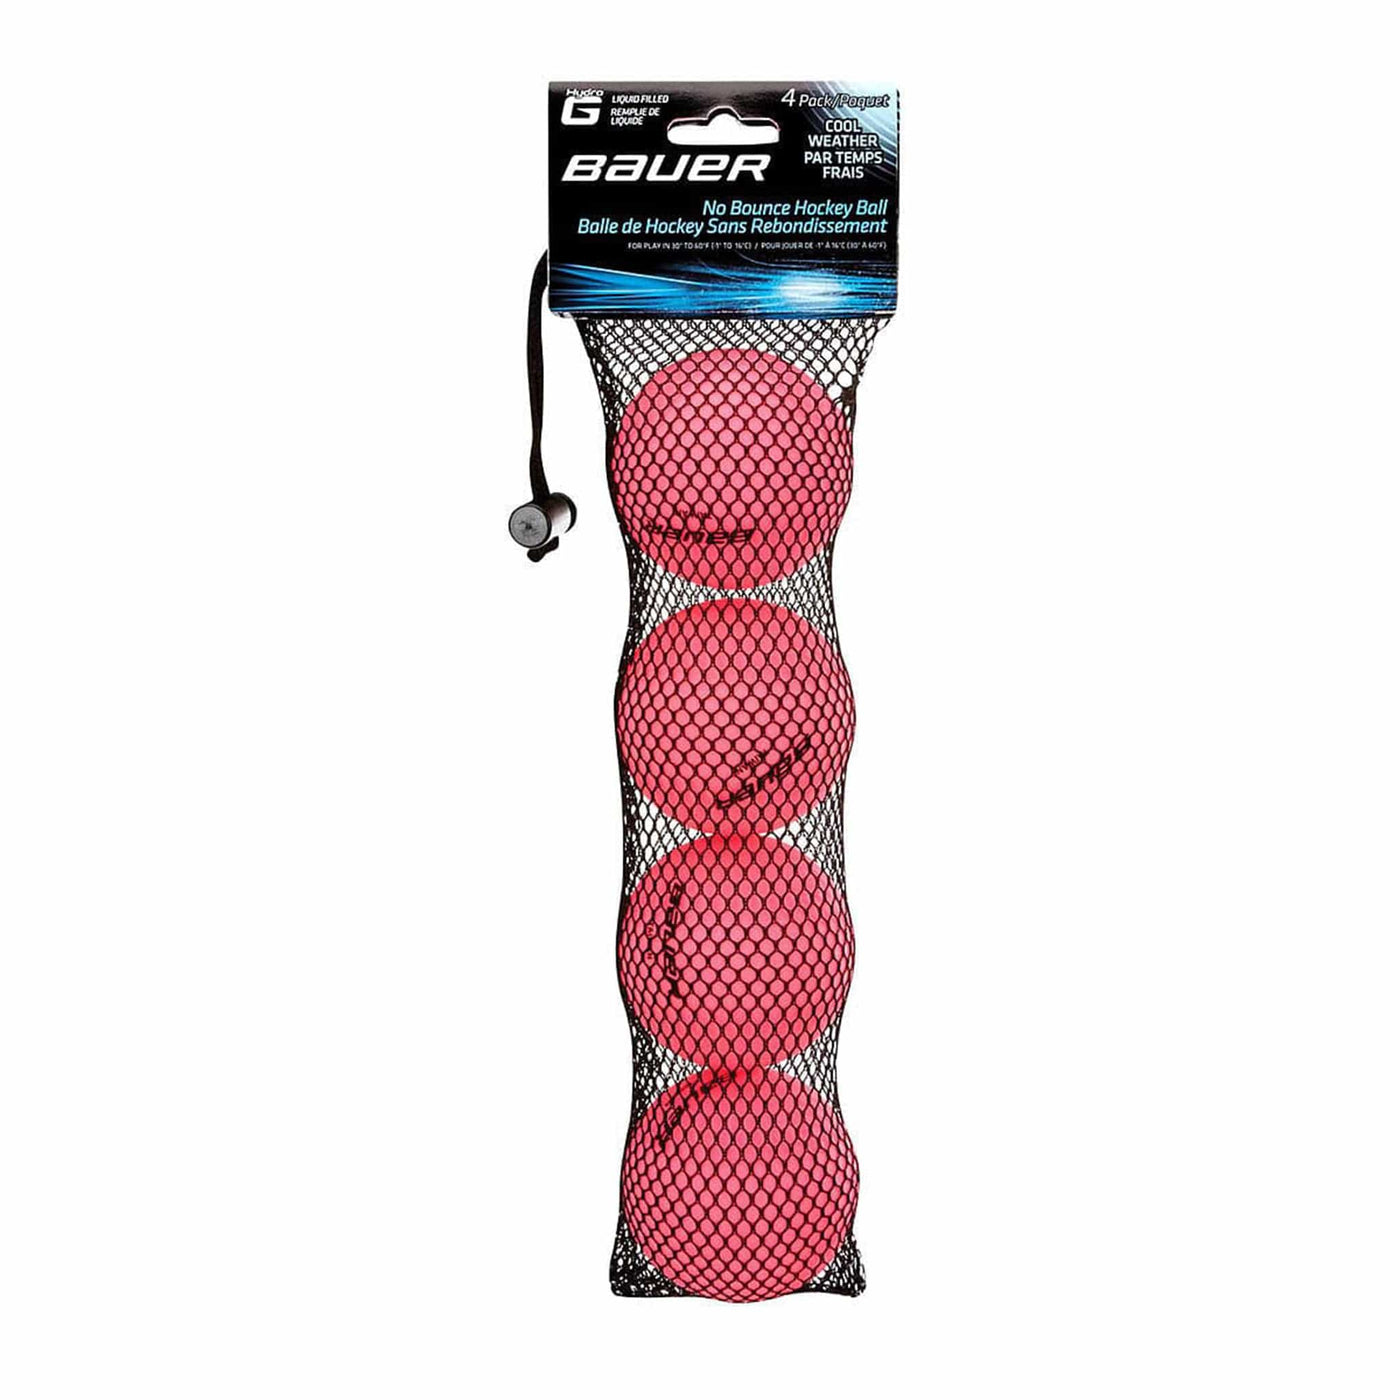 Bauer Hydro-G Liquid Filled No Bounce Hockey Balls (4-Pack) - The Hockey Shop Source For Sports